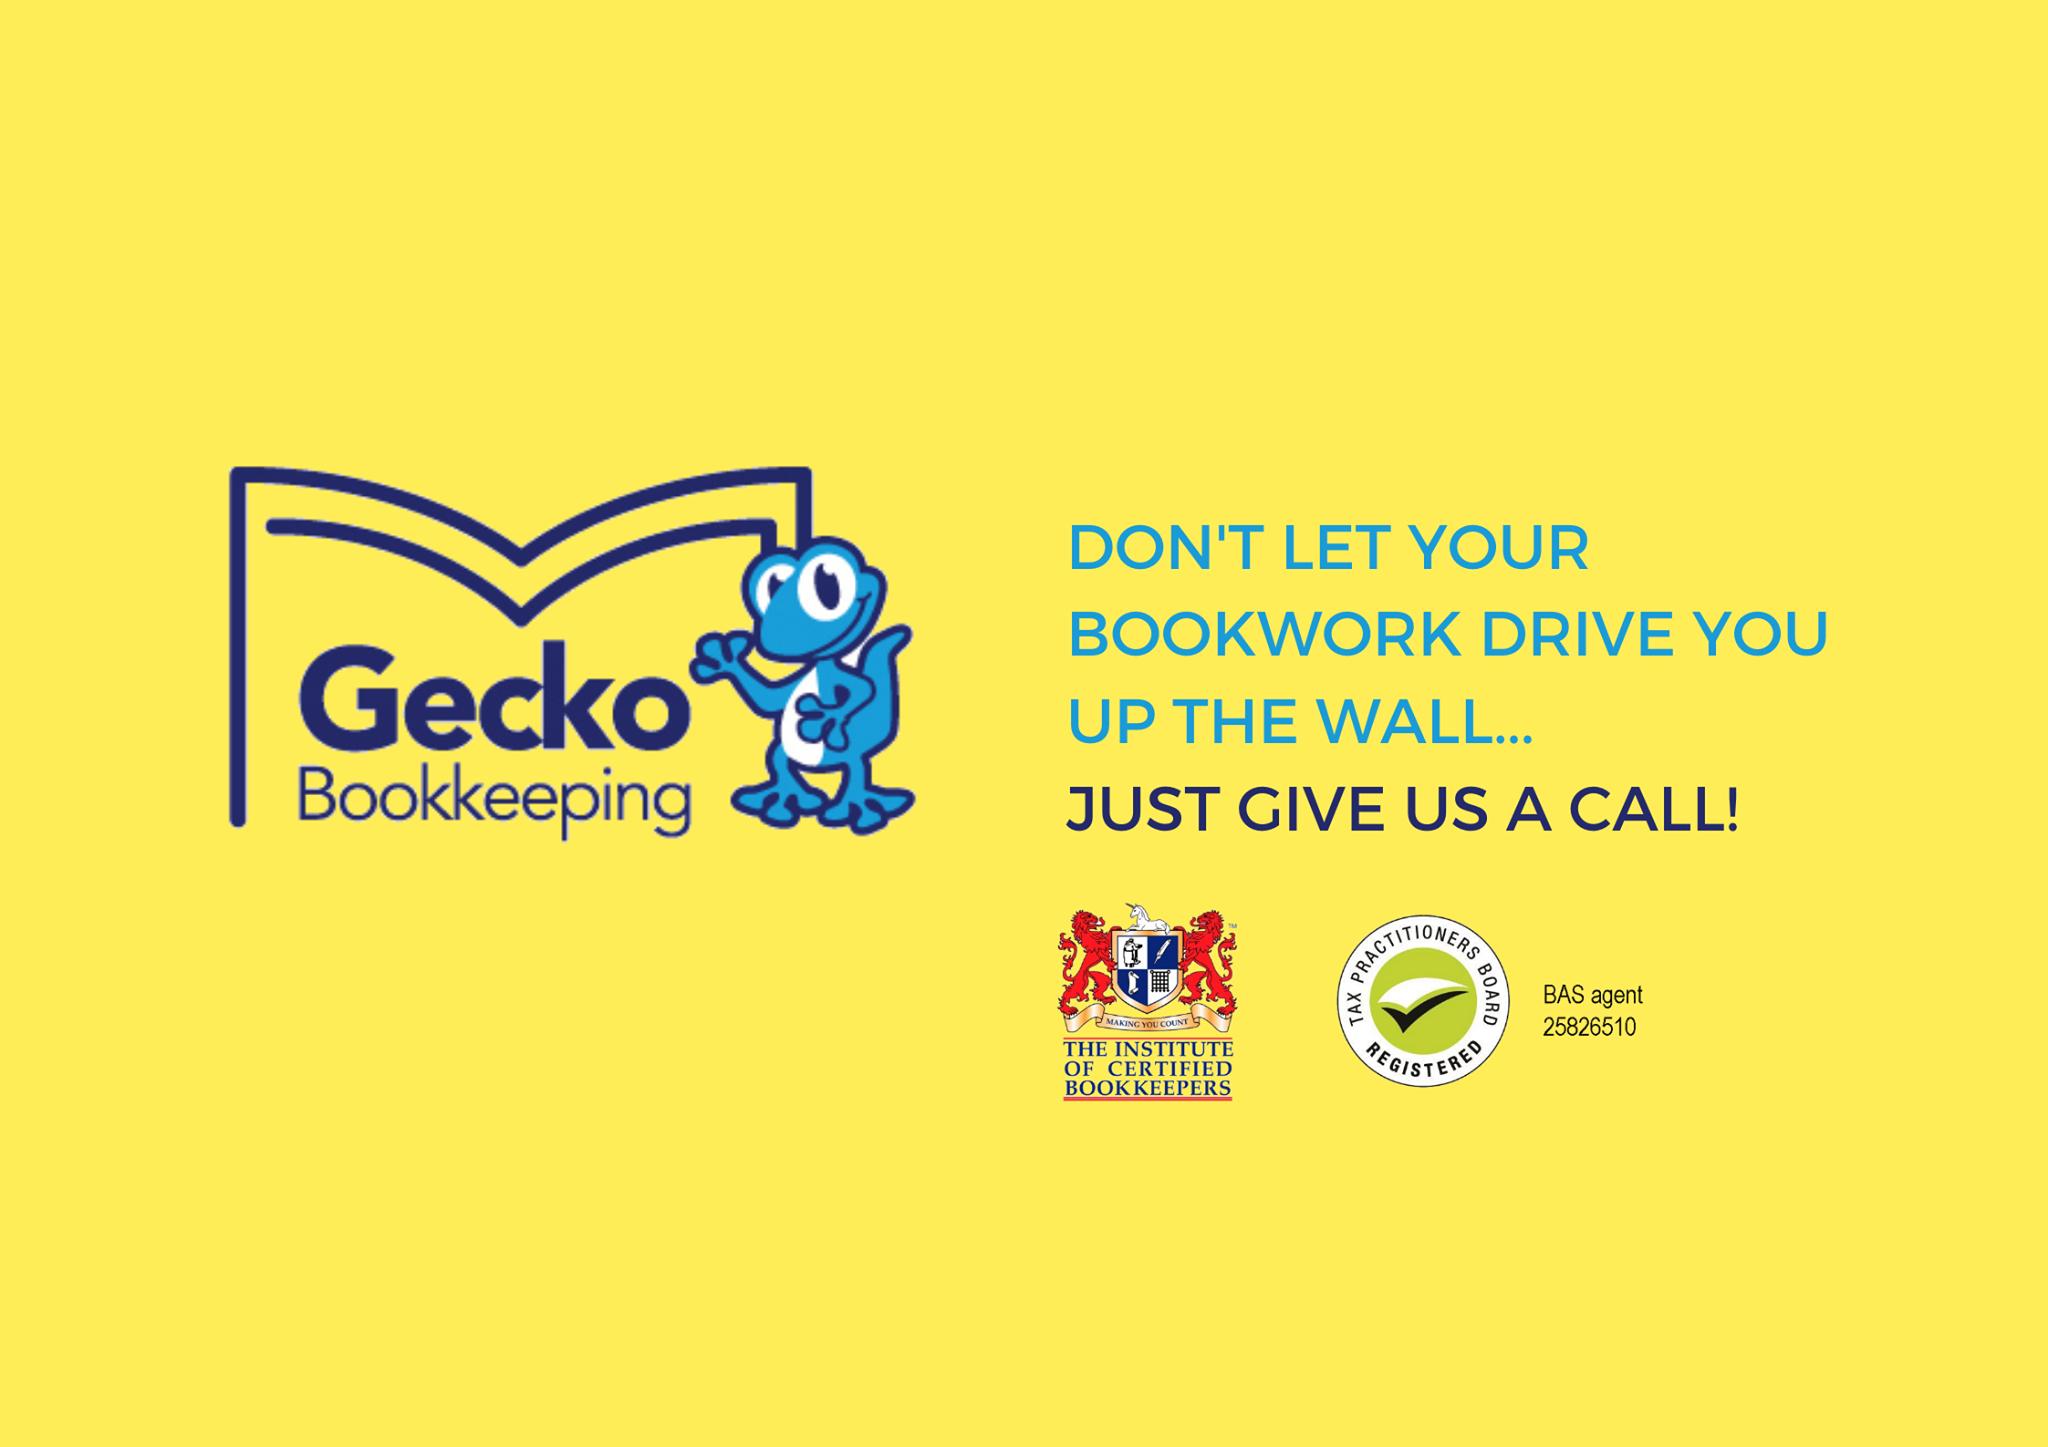 Gecko Bookkeeping | accounting | 23 Torview St, Rochedale South QLD 4123, Australia | 421278128 OR +61 421 278 128